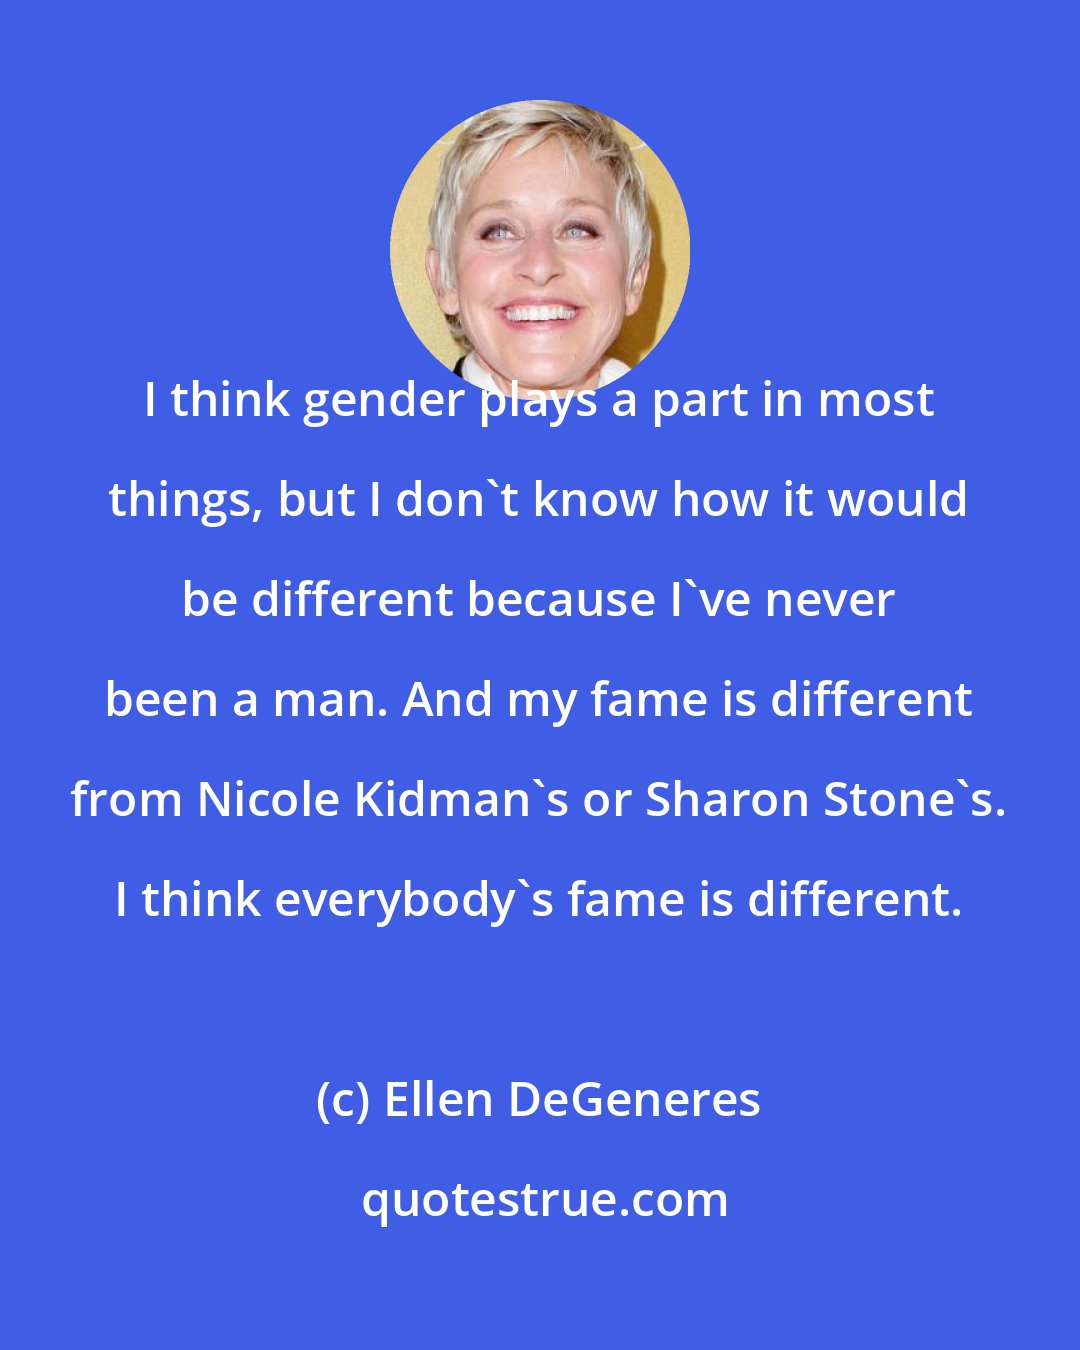 Ellen DeGeneres: I think gender plays a part in most things, but I don't know how it would be different because I've never been a man. And my fame is different from Nicole Kidman's or Sharon Stone's. I think everybody's fame is different.